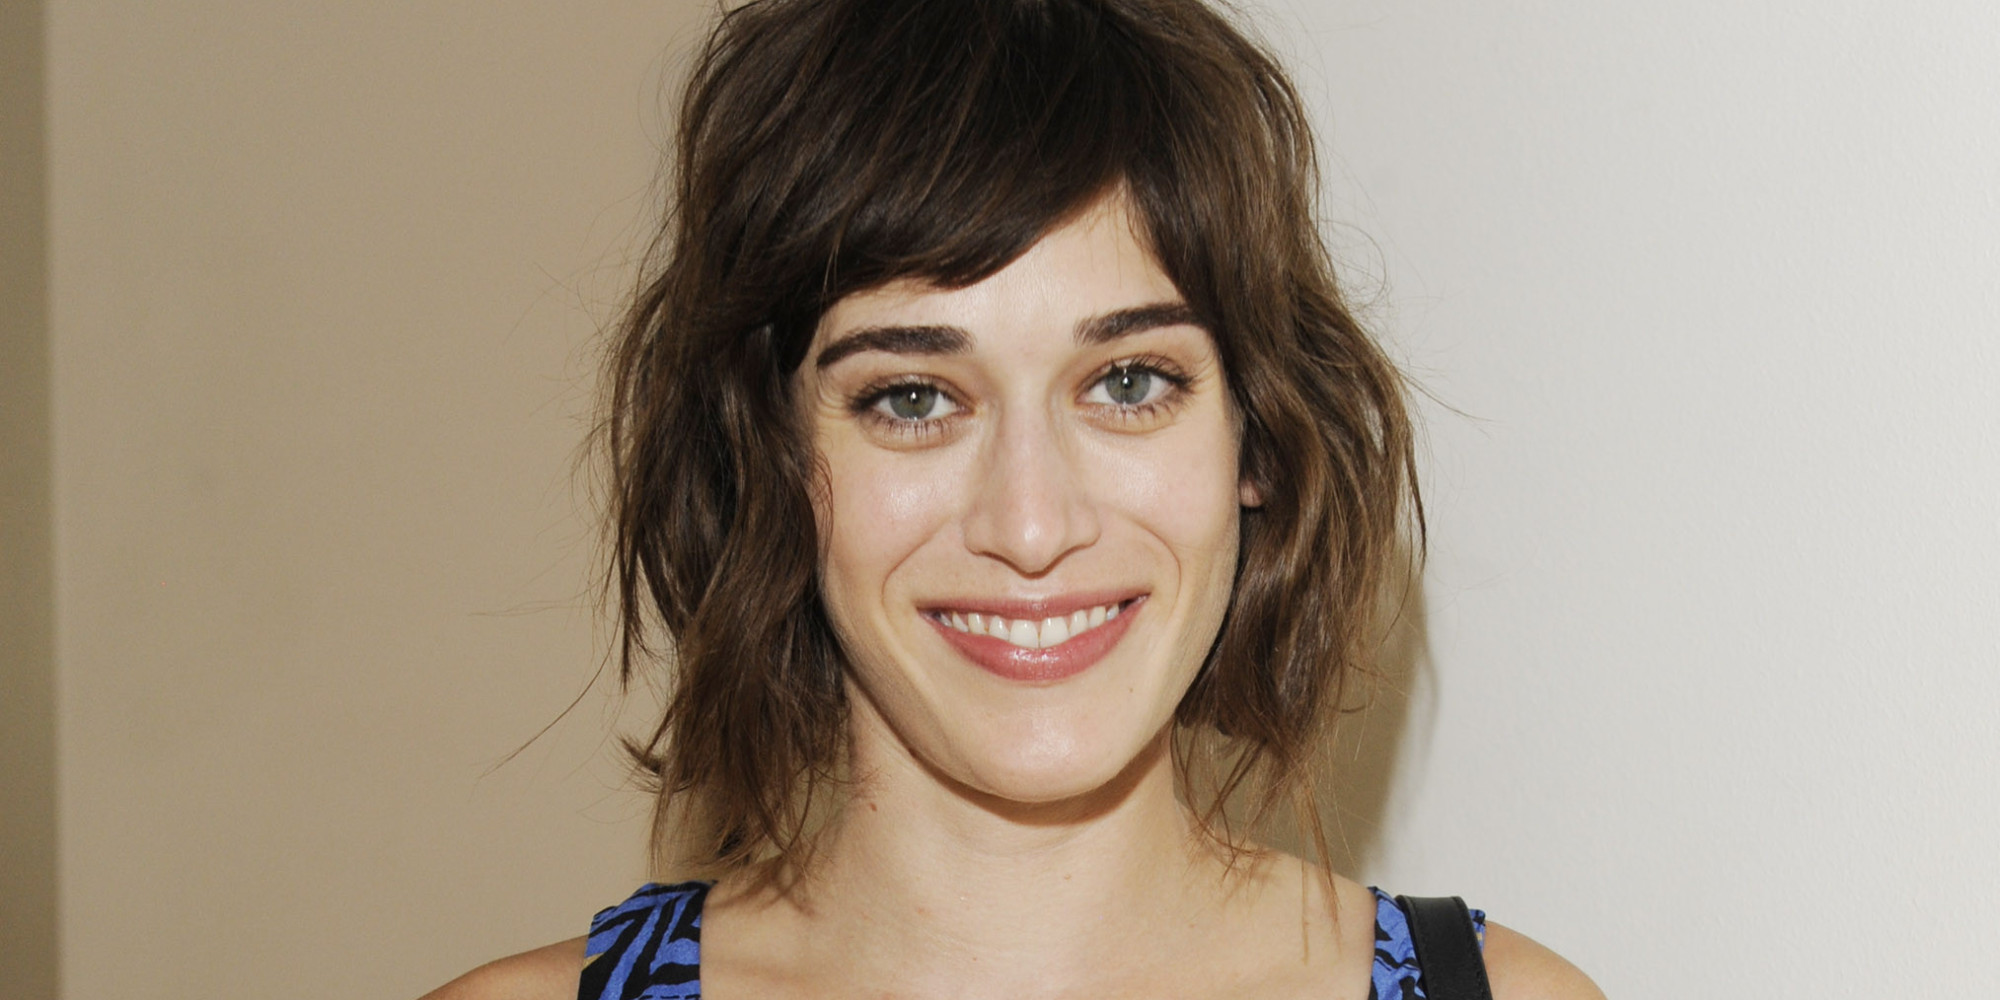 Lizzy Caplan Masters Of Sex Actress On What It S Really Like To Film Sex Scenes Huffpost